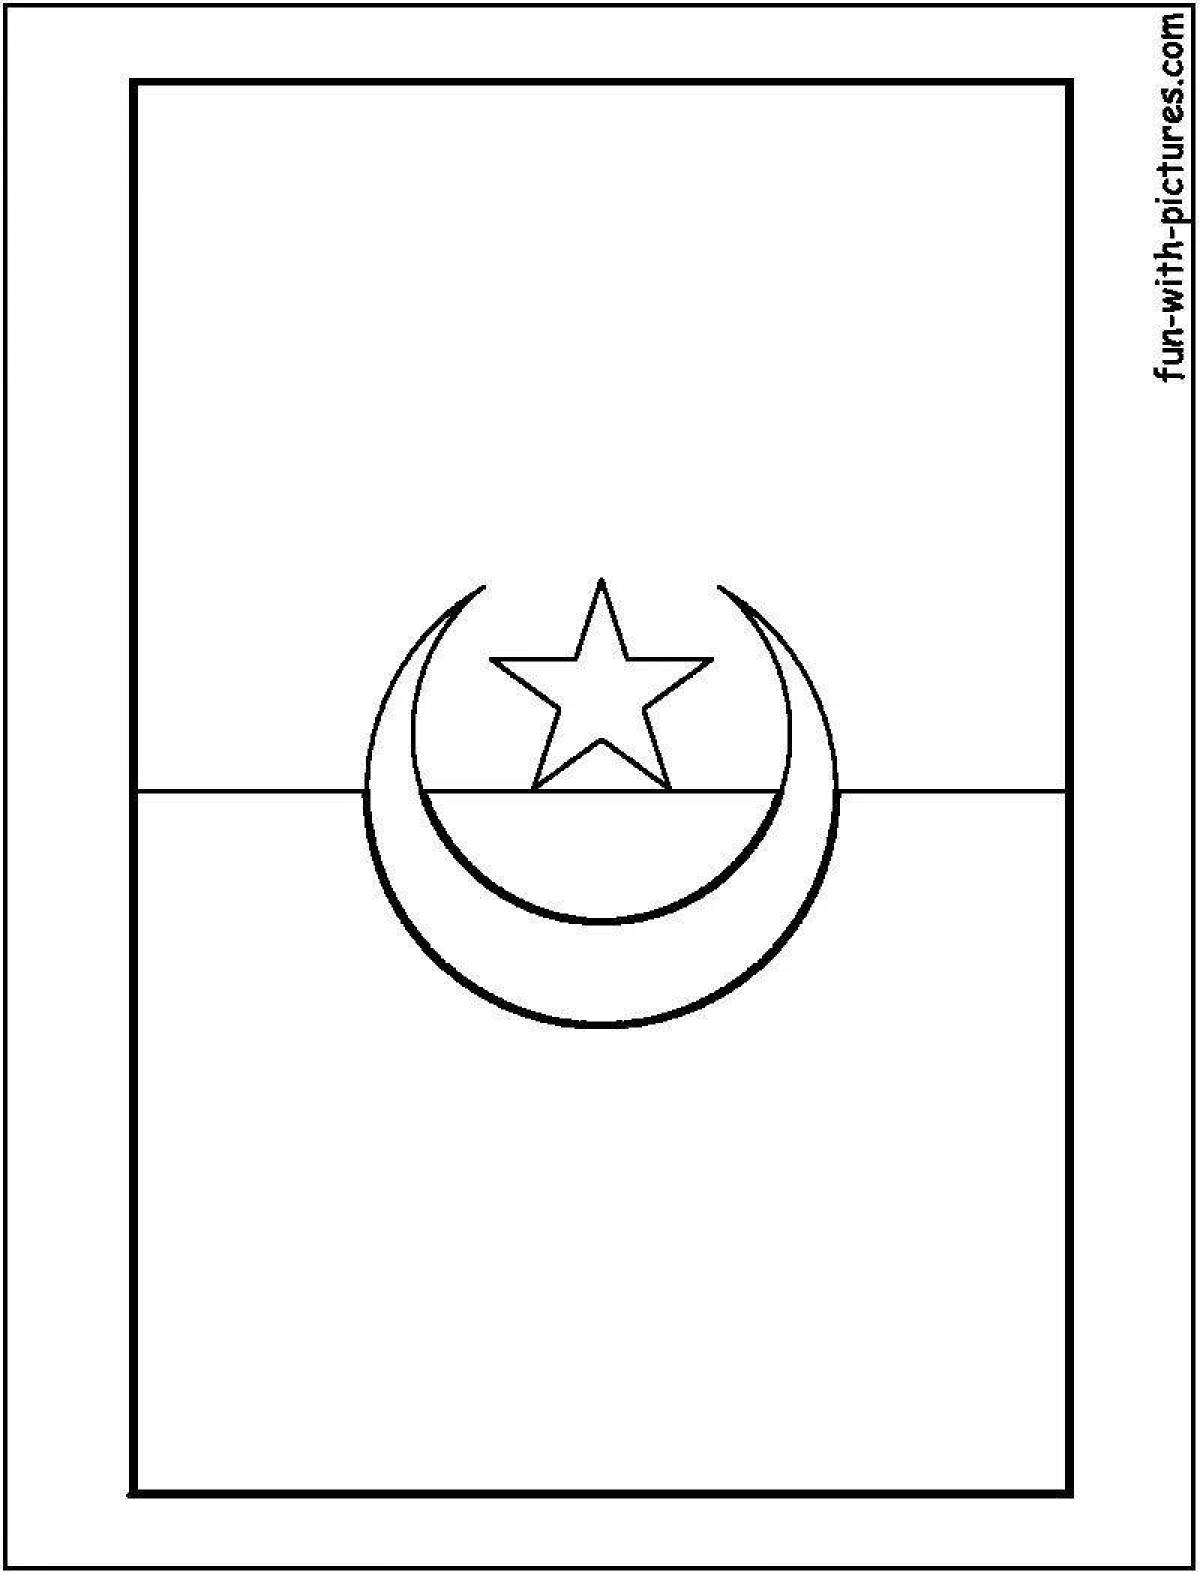 Funny turkey flag coloring page